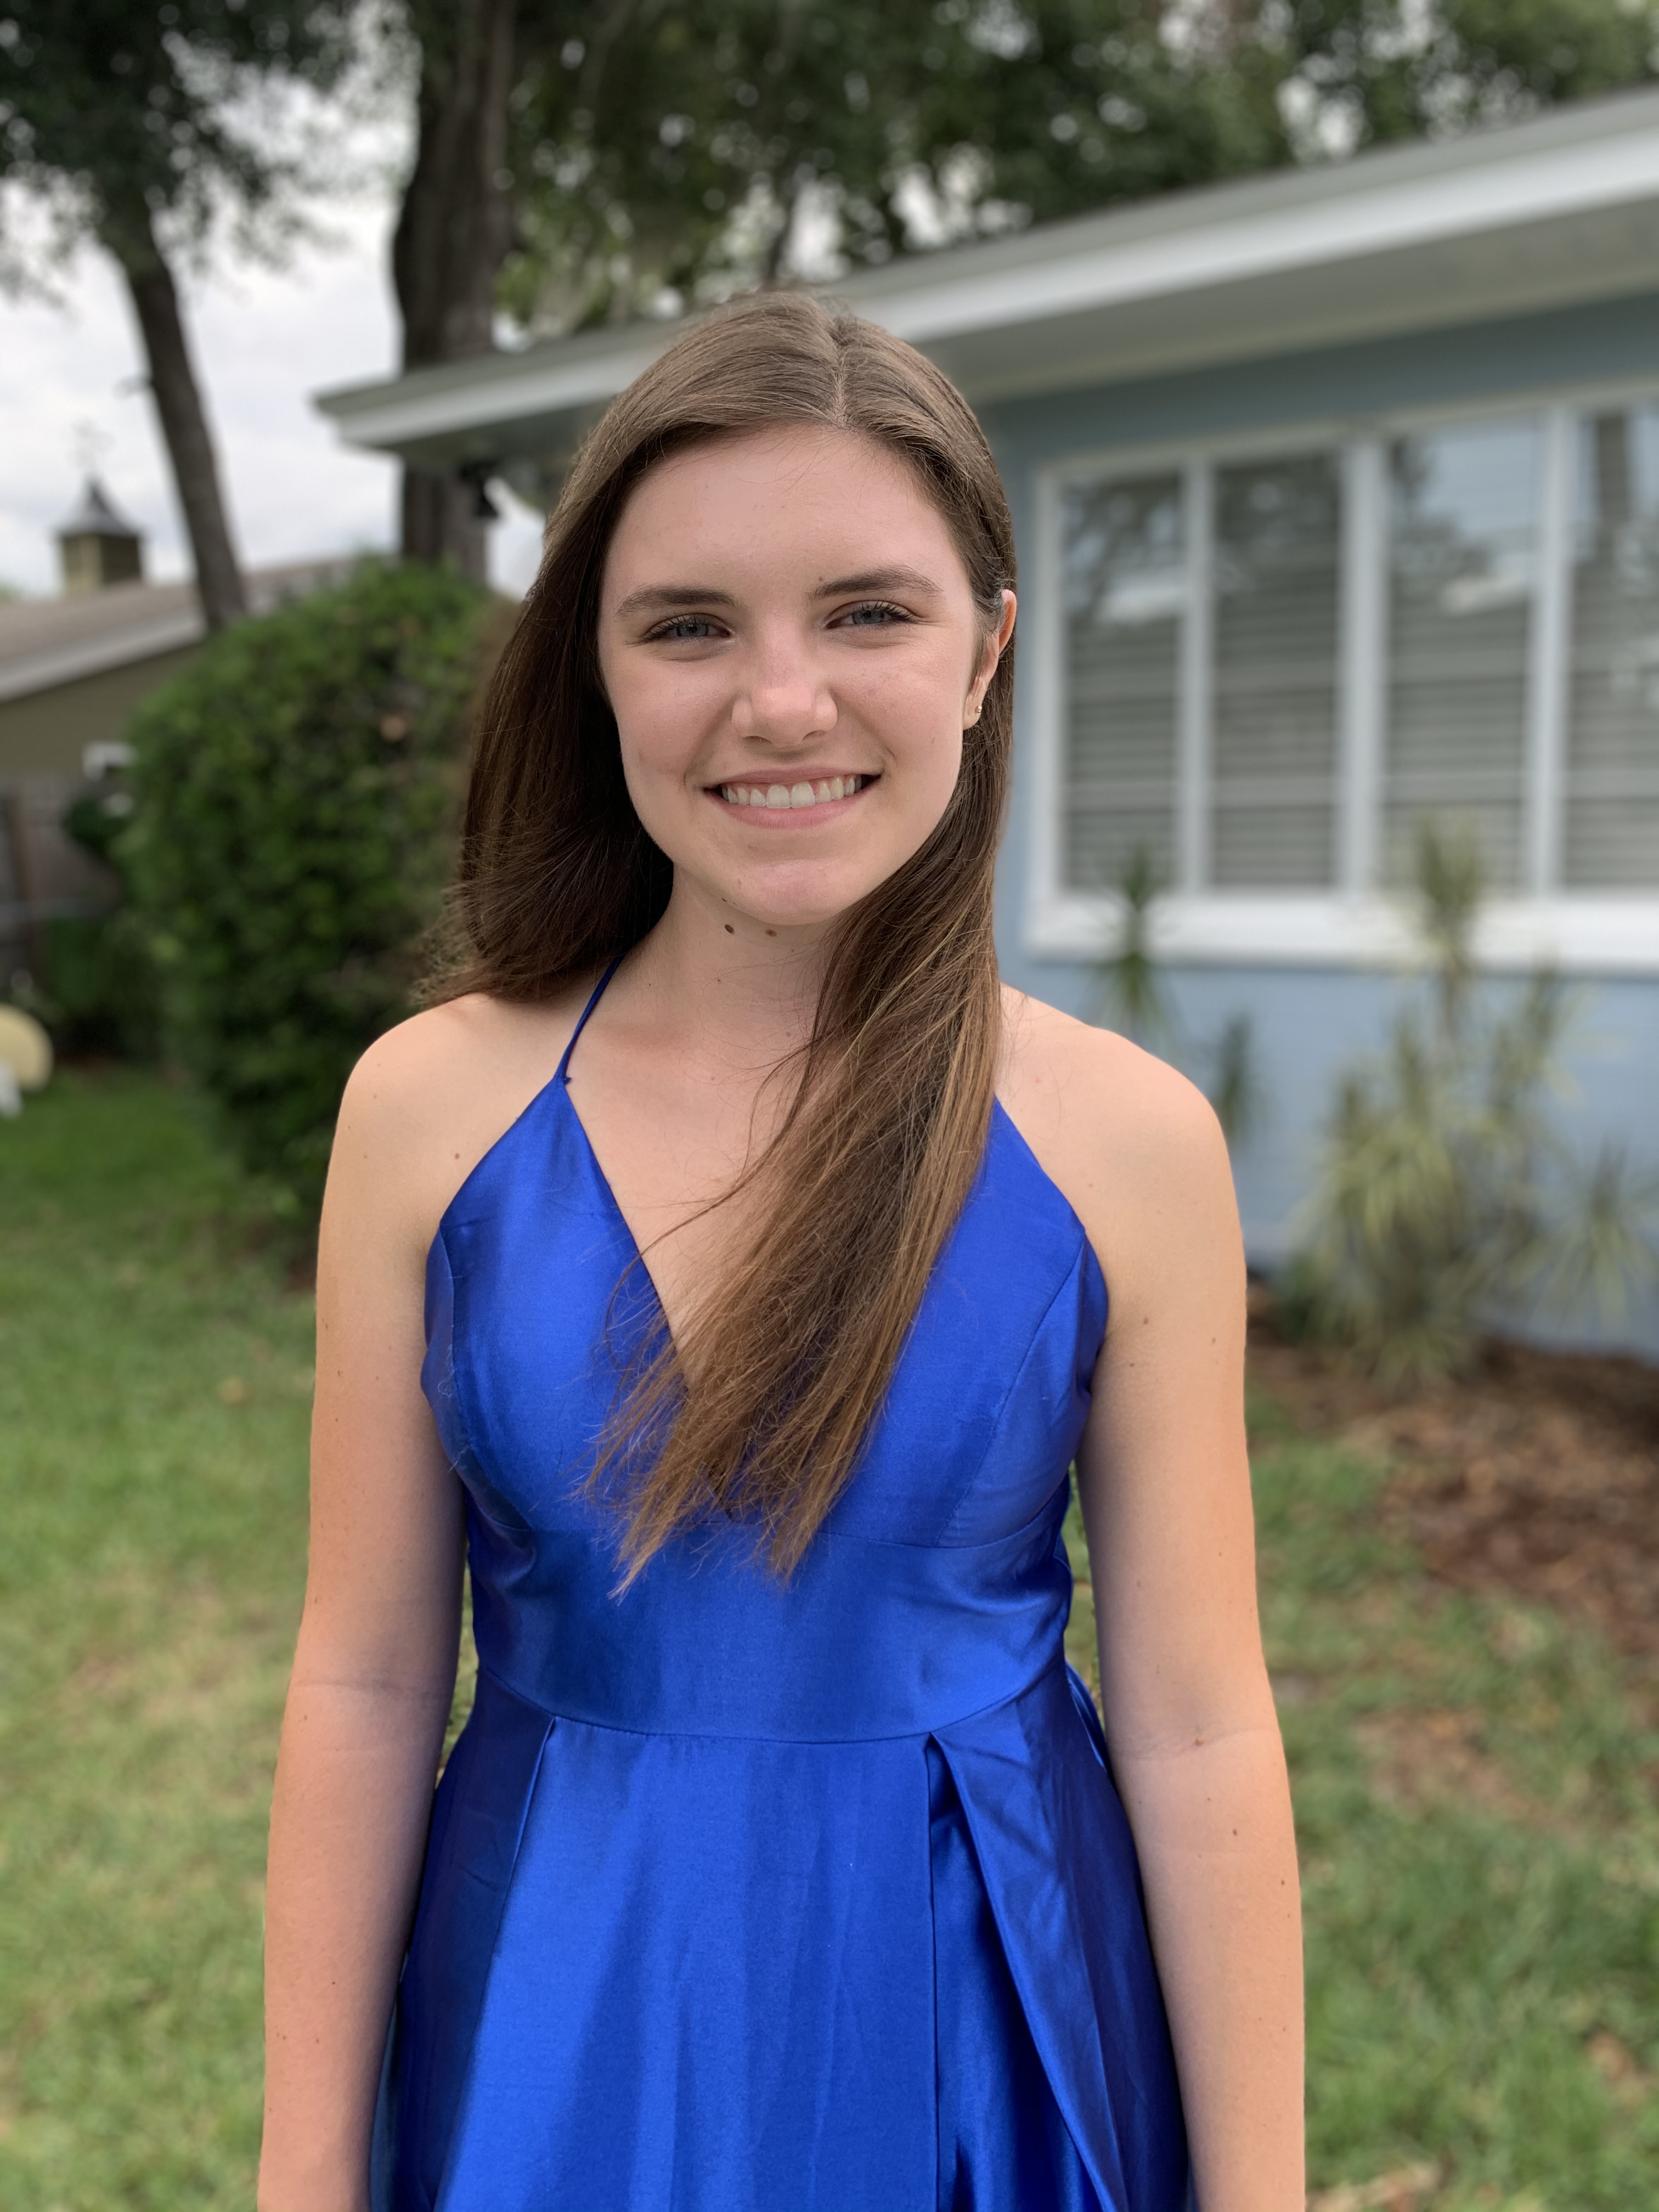 A person with long brown hair stands in front of a house. They are smiling and wearing a blue dress..